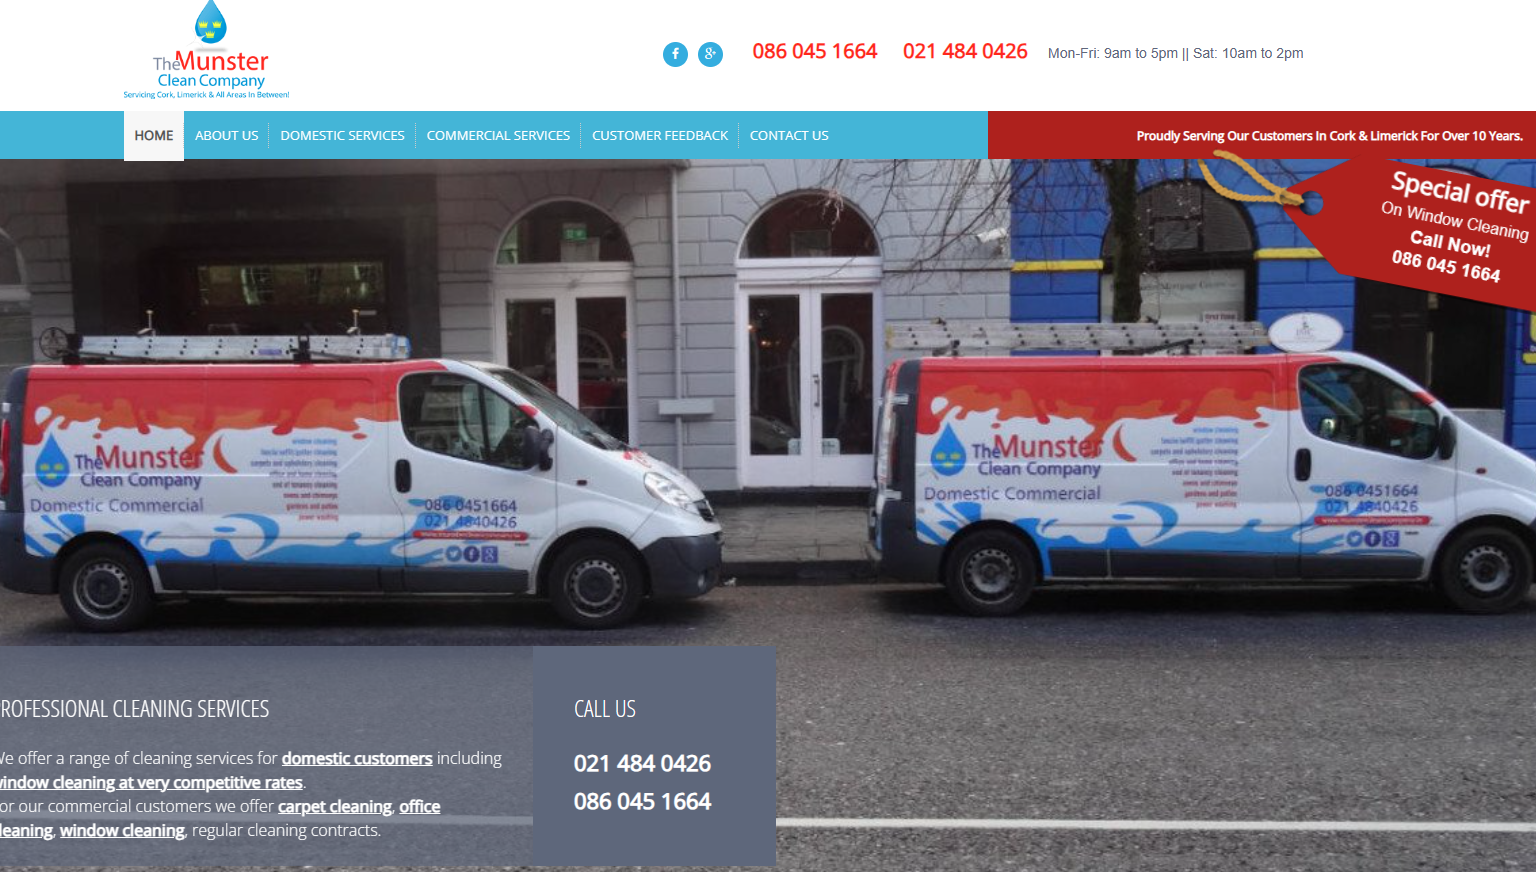 Munster Cleaning Company